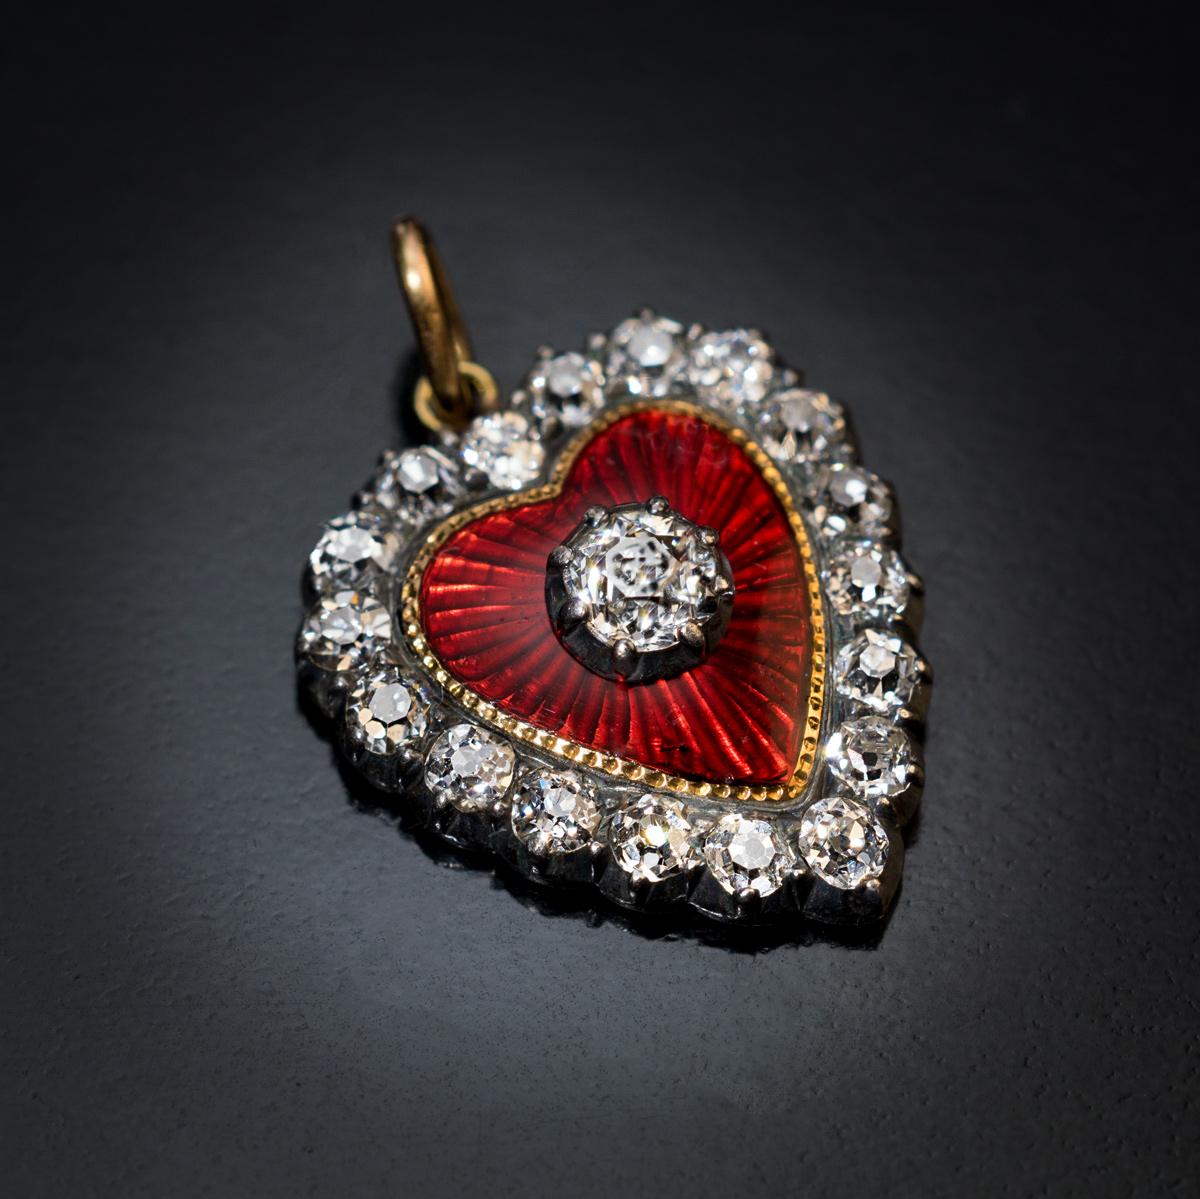 This Belle Époque, c.1890s, antique heart-shaped pendant is finely crafted in 18K gold and silver. The pendant features an excellent vivid red guilloche enamel and bright white chunky old mine cut diamonds.

Estimated total diamond weight is 0.64